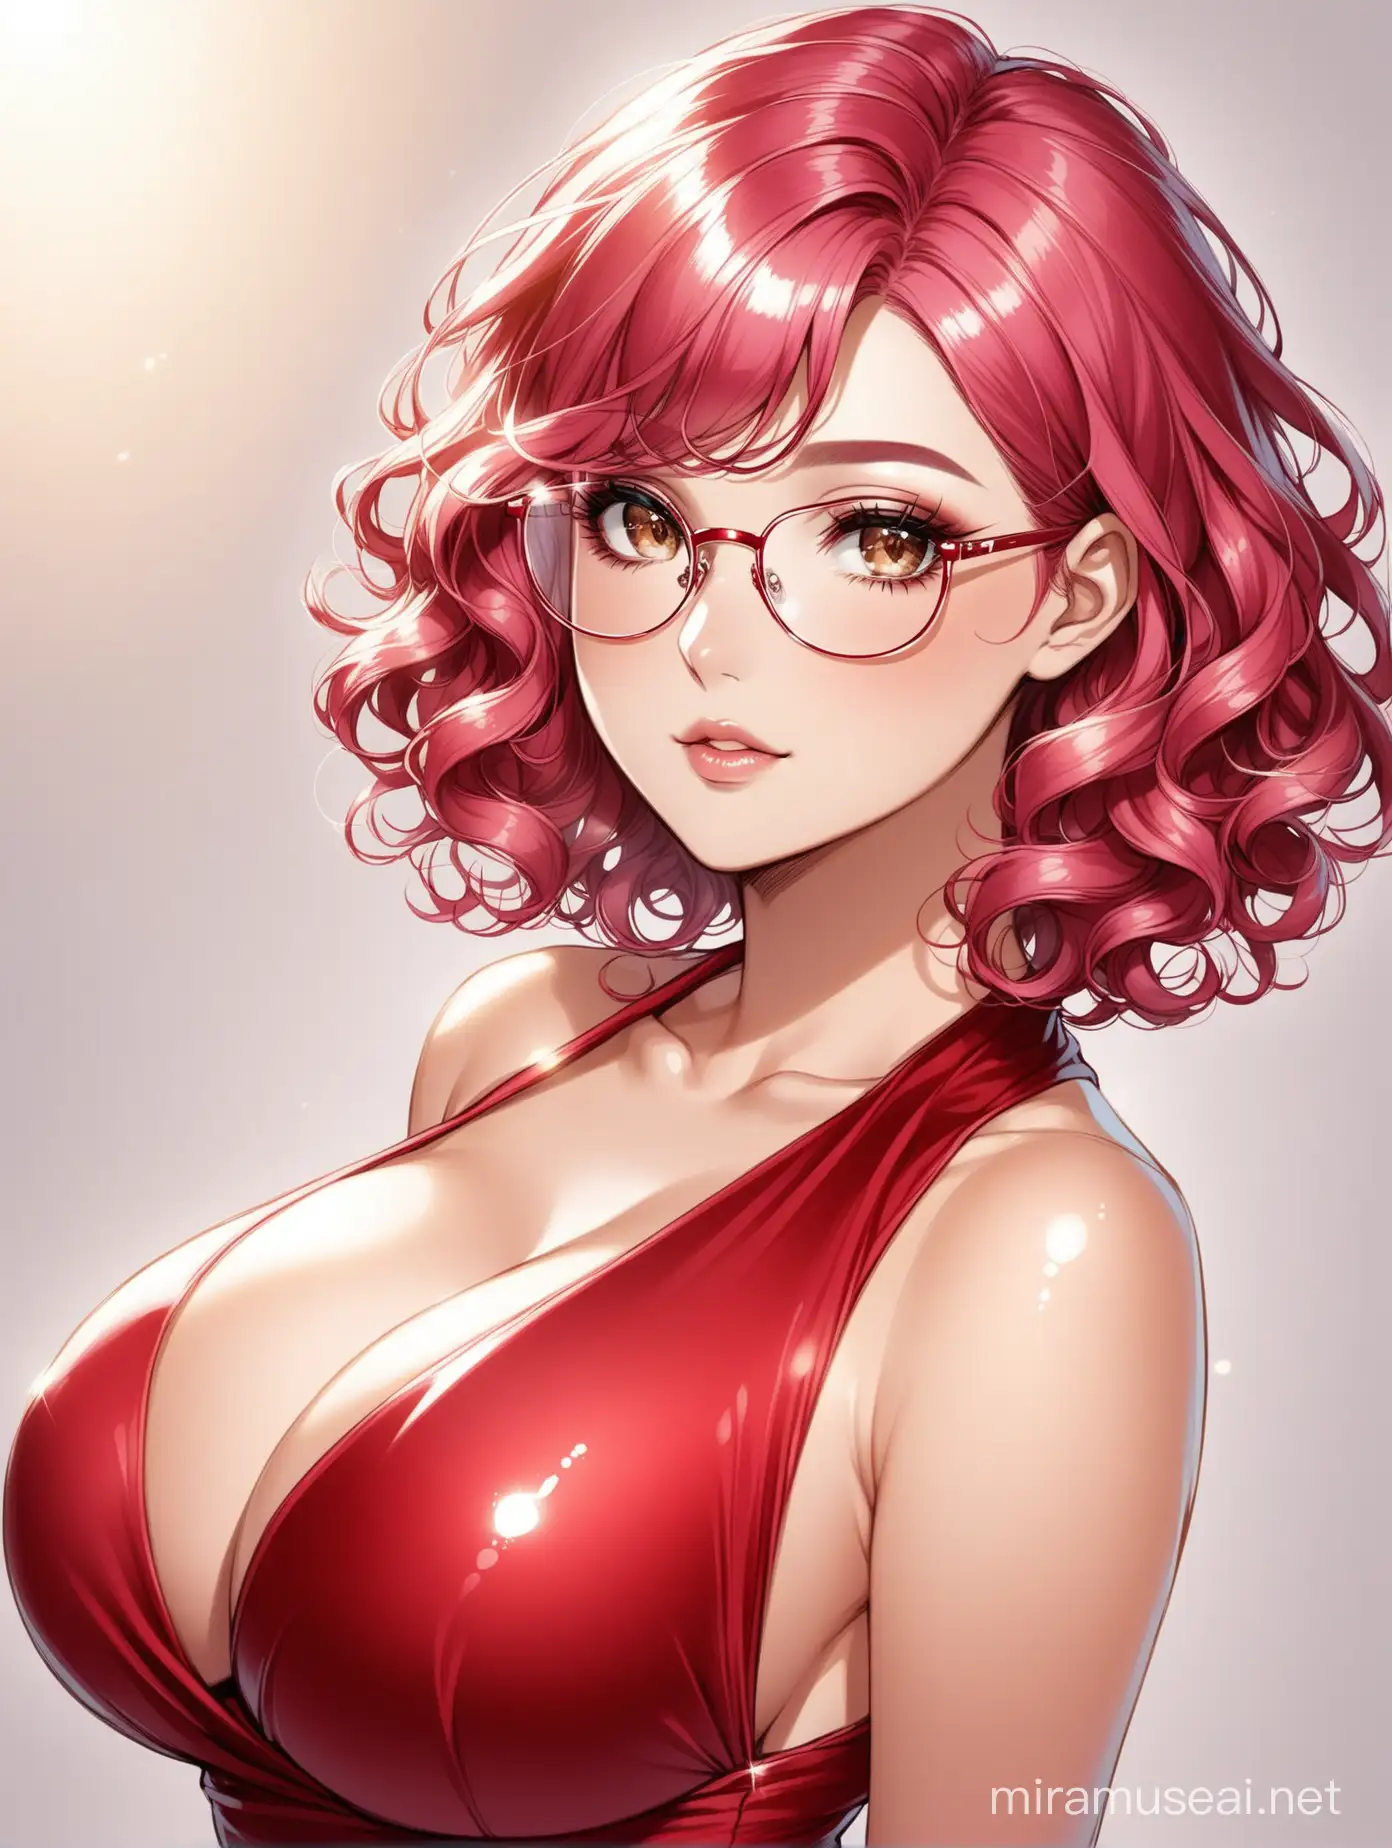 Stylish Woman with Curly Pink Hair and Red Dress